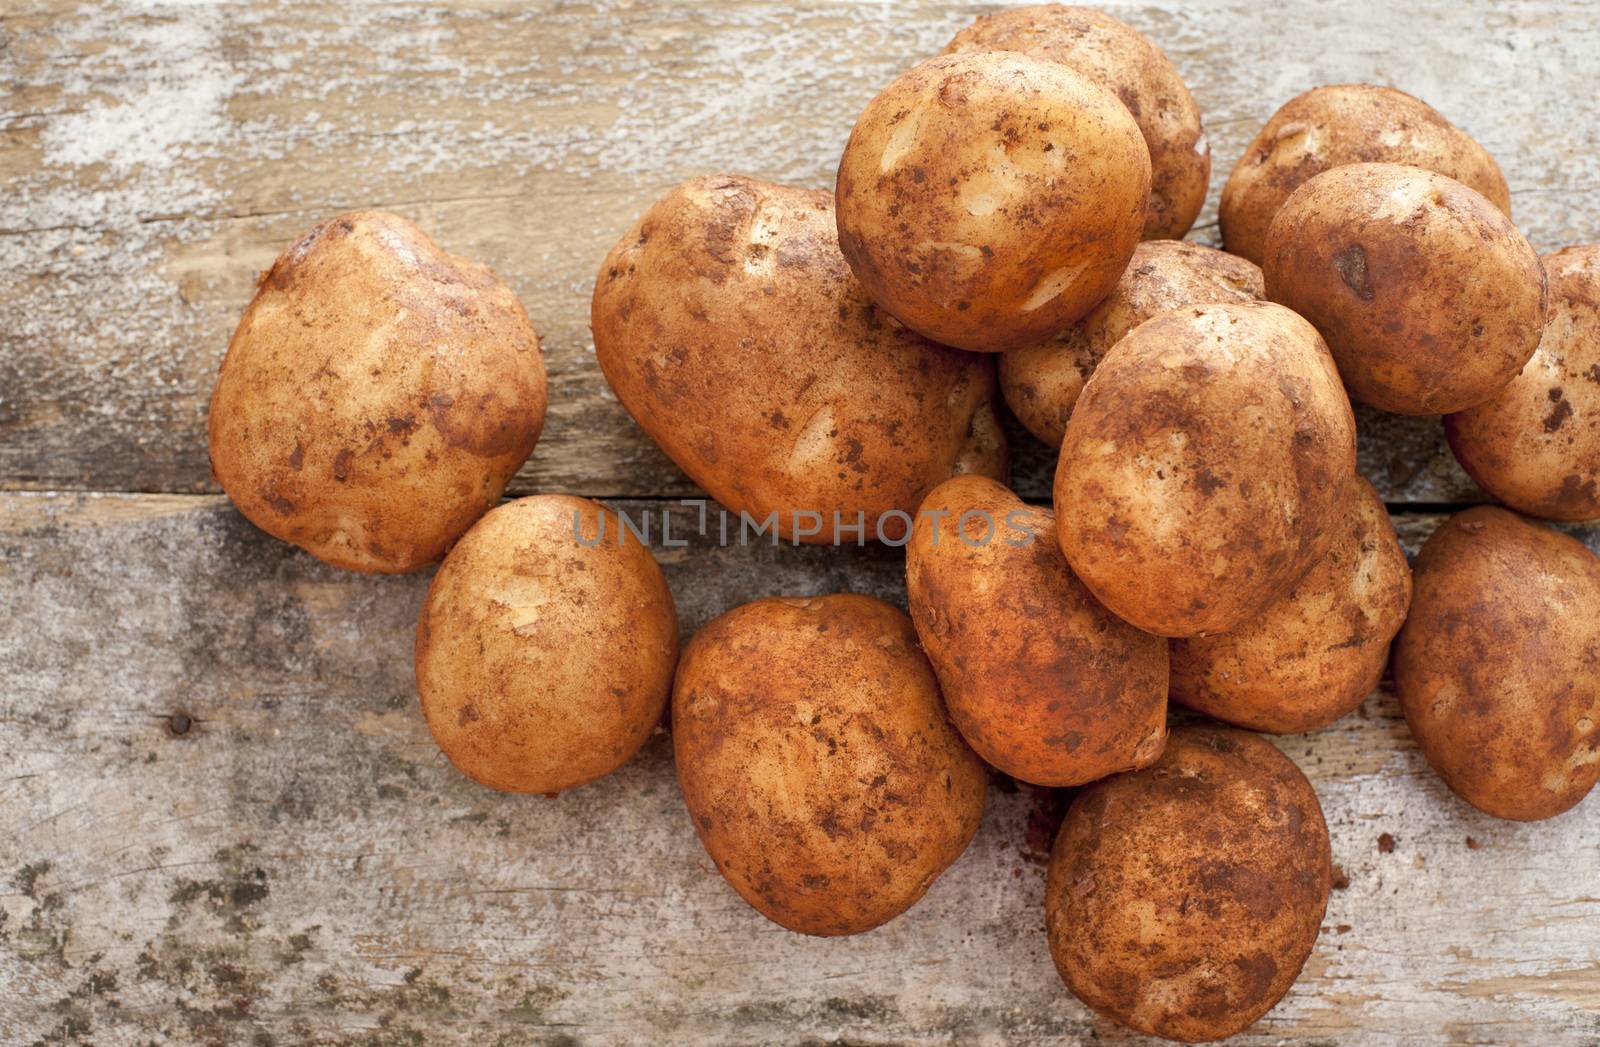 Pile of uncleaned fresh whole farm potatoes on a rustic wooden table at market in a healthy or vegetarian diet concept